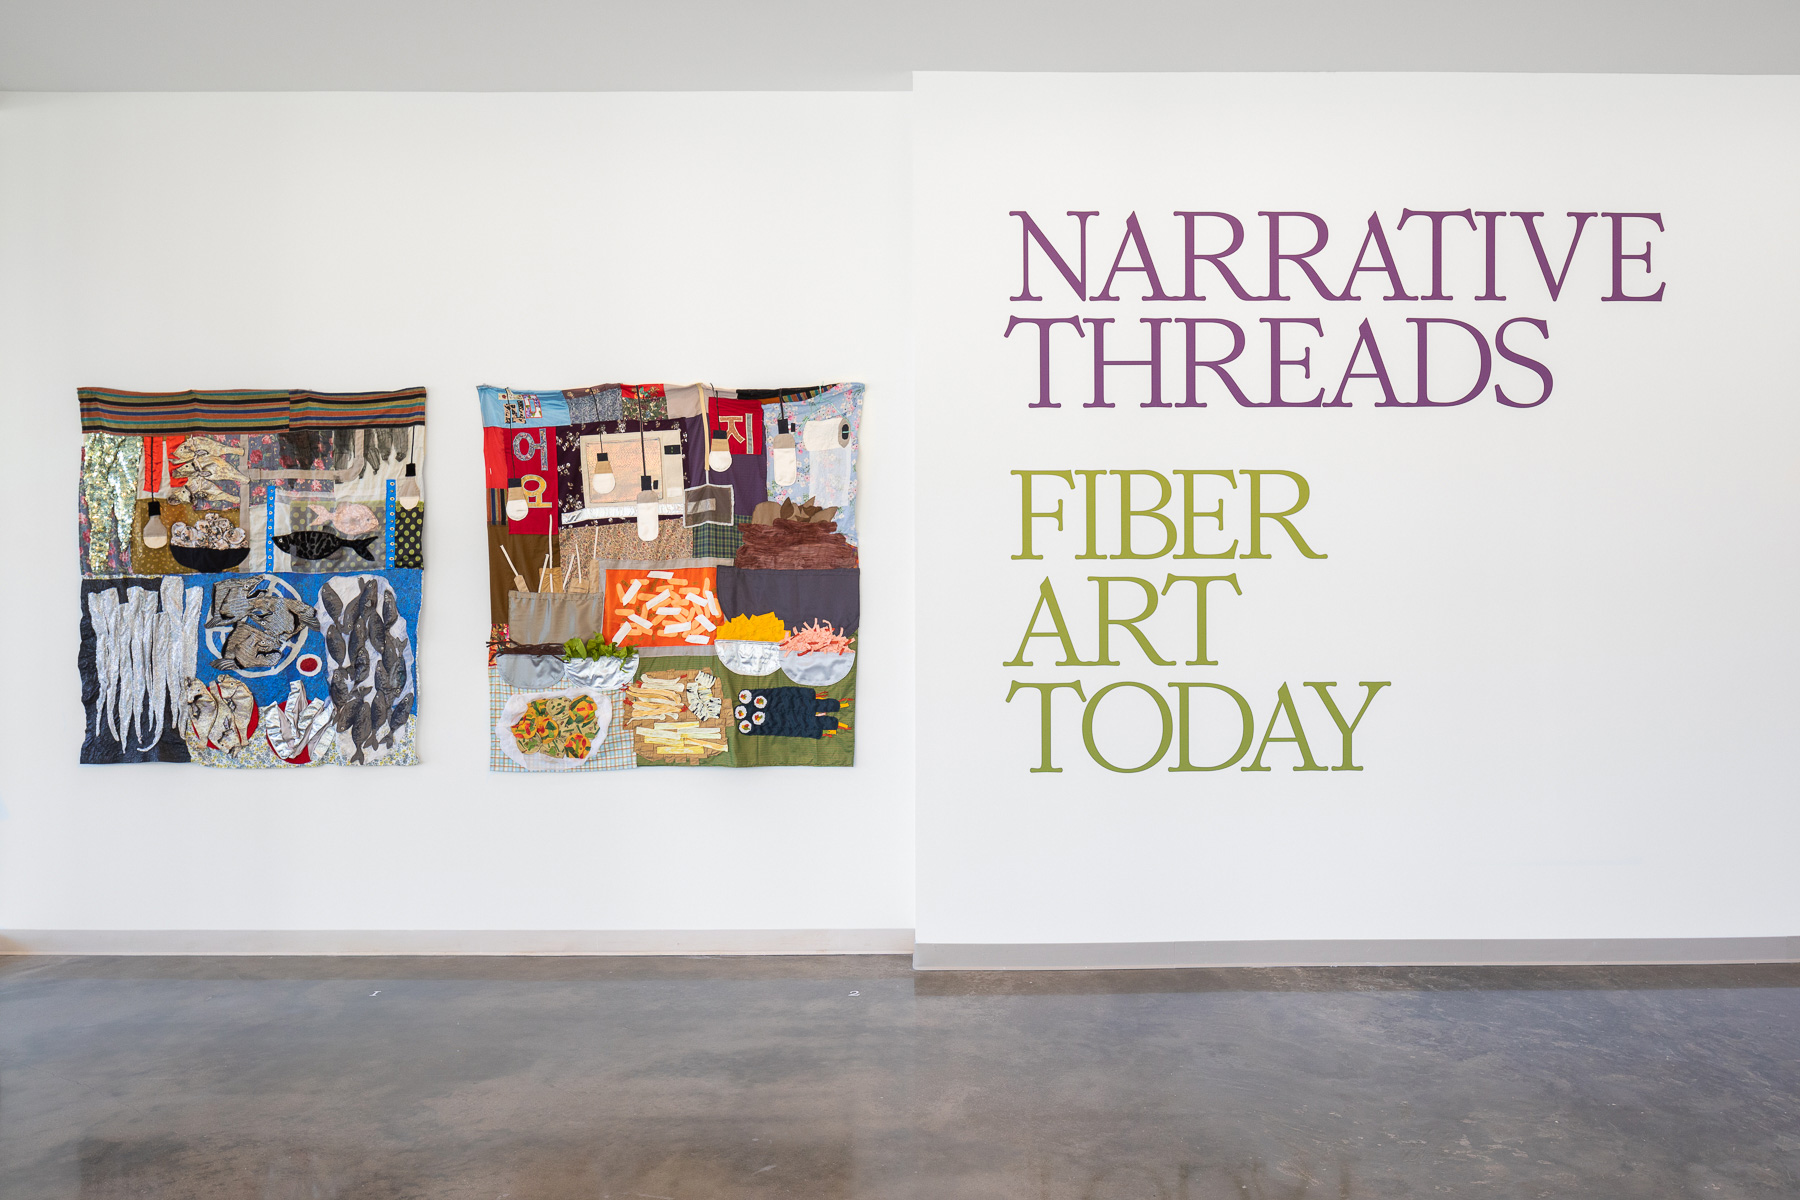 Upcoming: ThreadsThrough Time and Weaving Cultural Identities